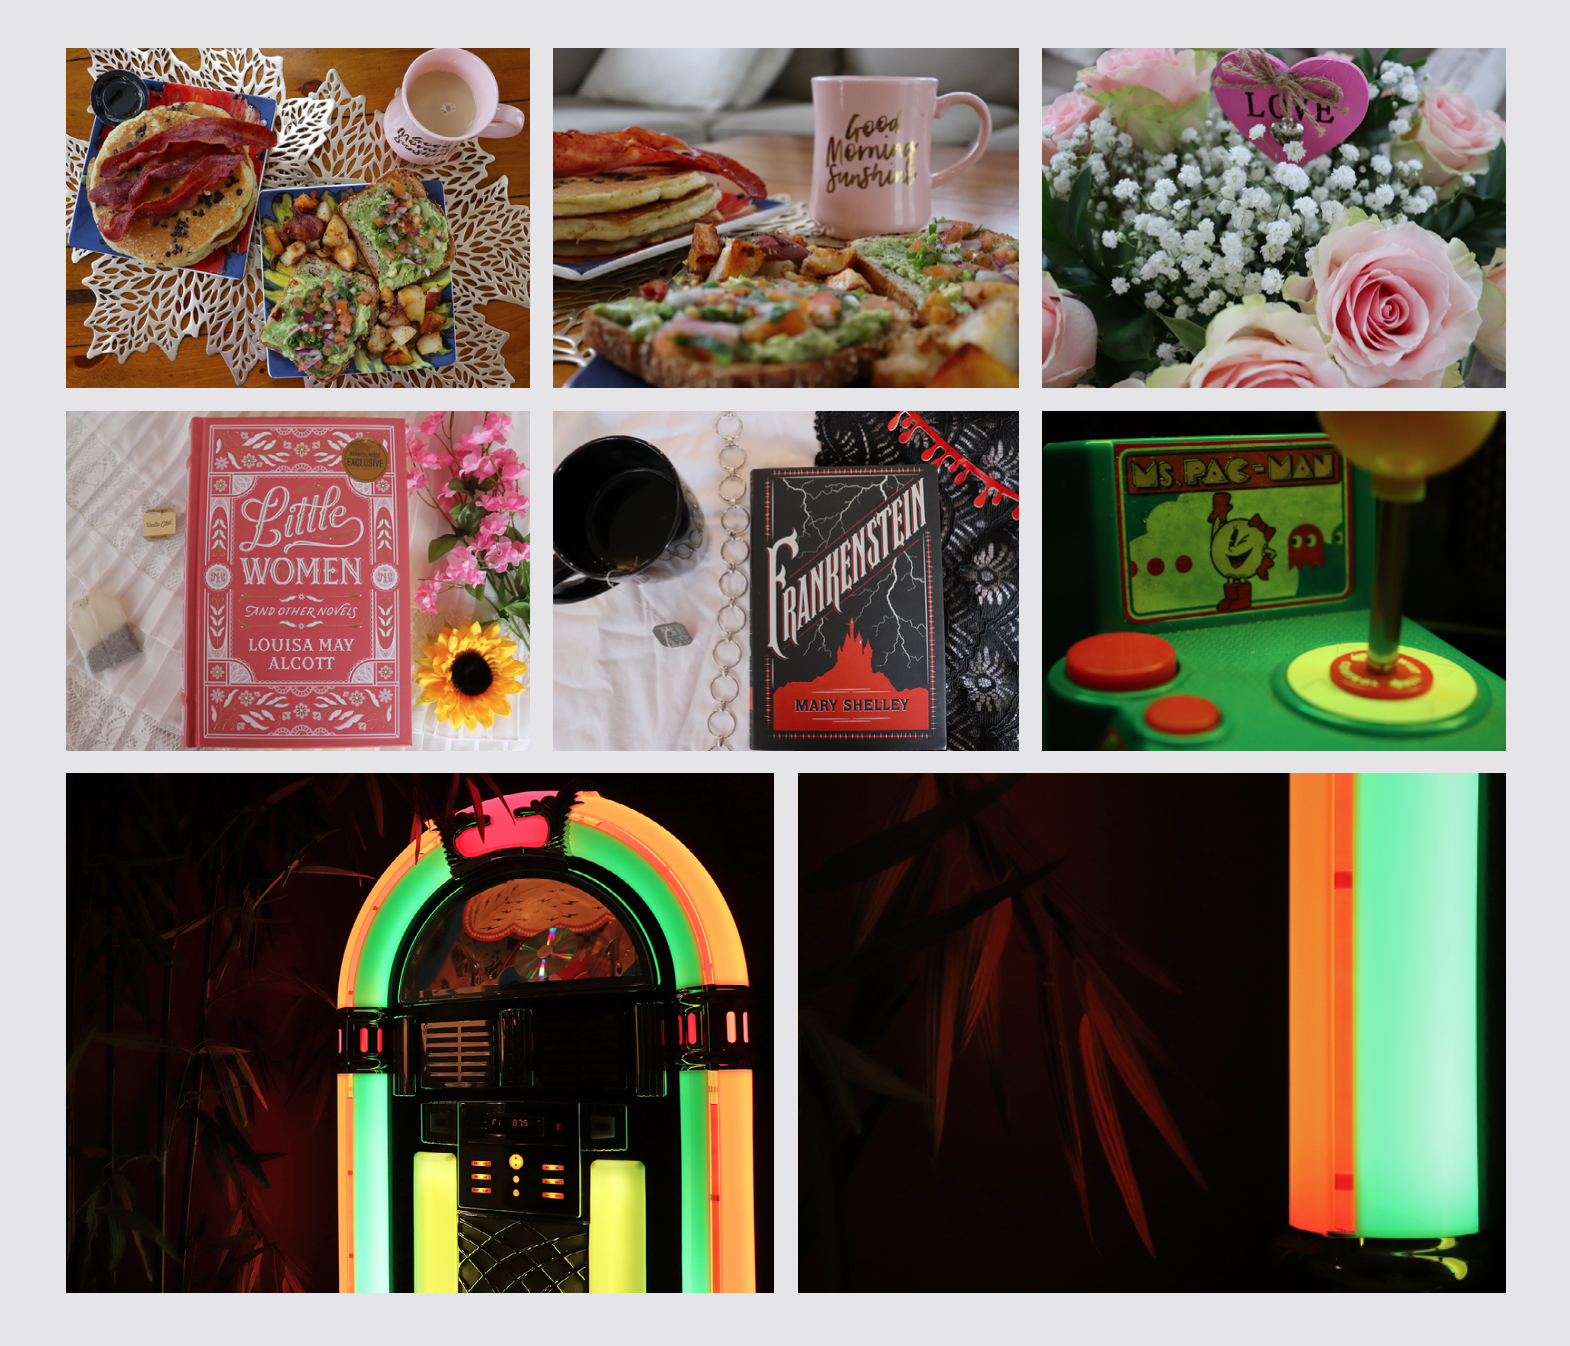 grid of photos of brunch, books, and arcade